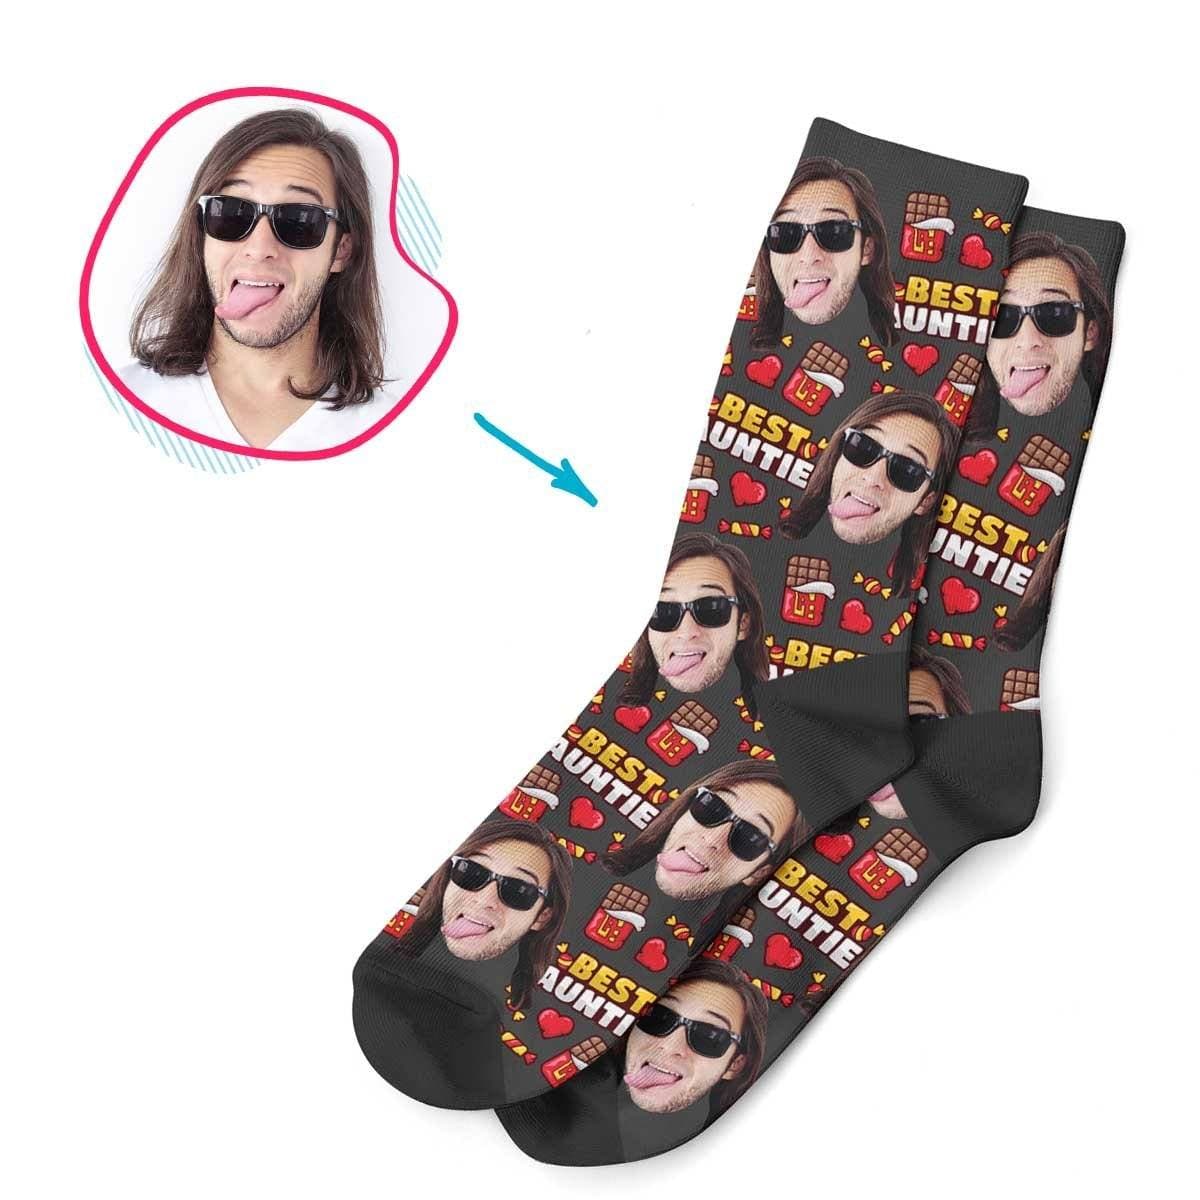 Dark Auntie personalized socks with photo of face printed on them